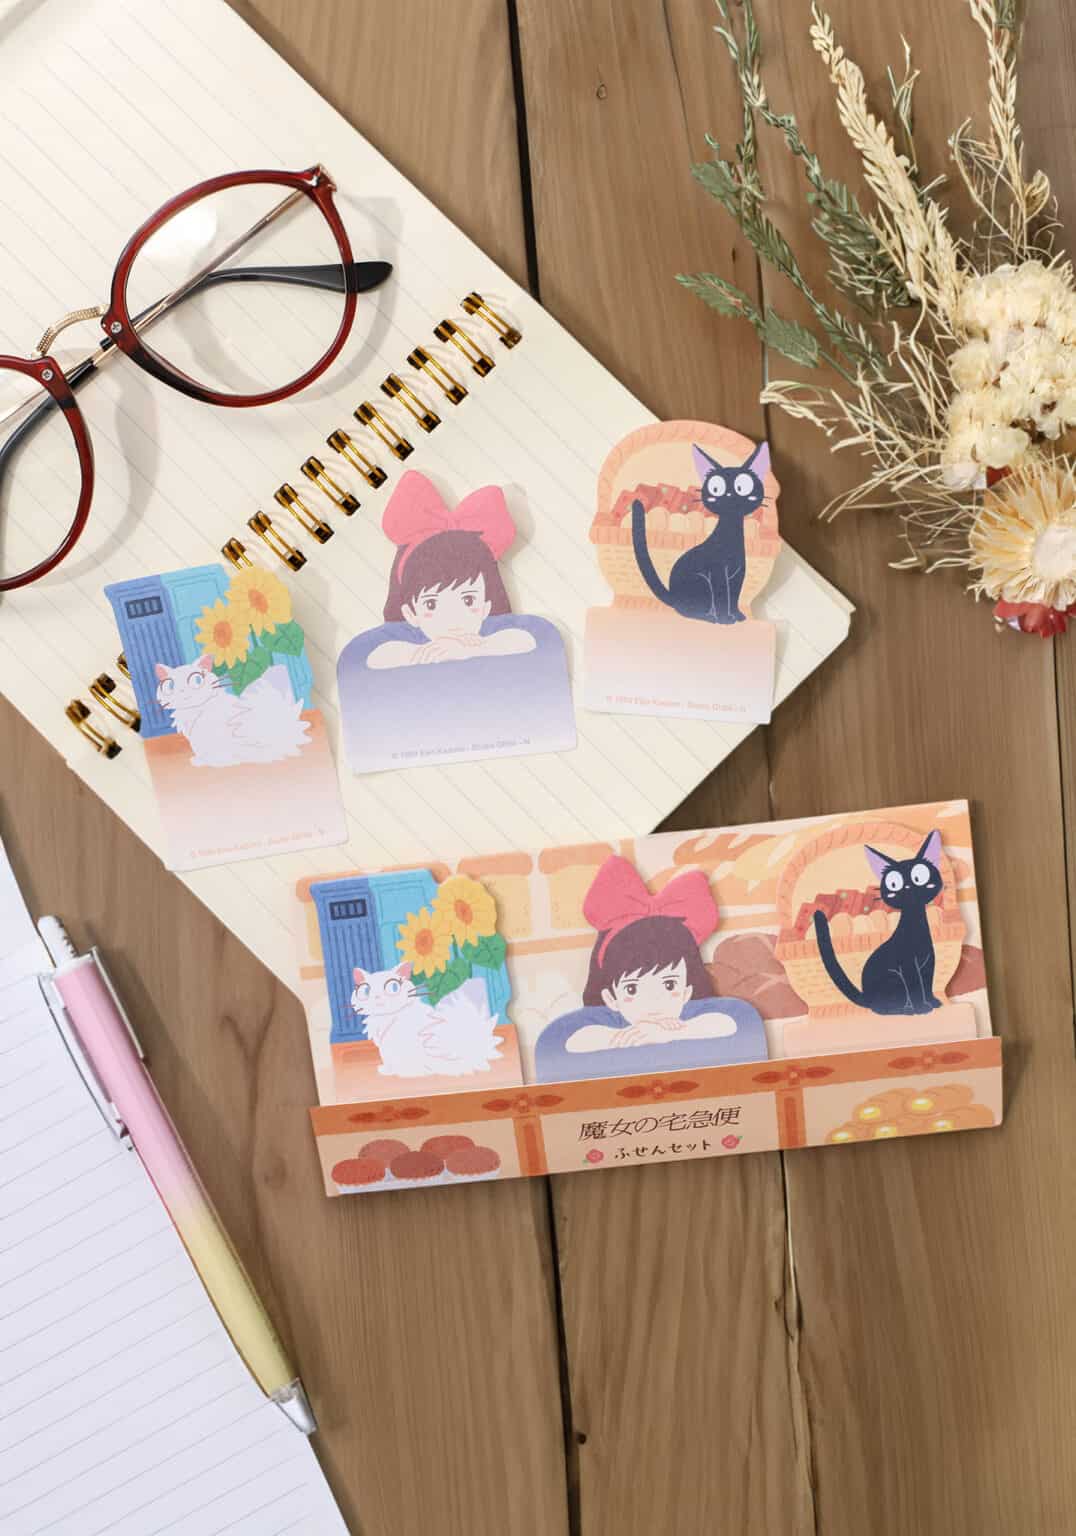 Clever Idiots Copy of Studio Ghibli Classics Sticky Notes Sets Kiki's Delivery Service Kawaii Gifts 4549743942230